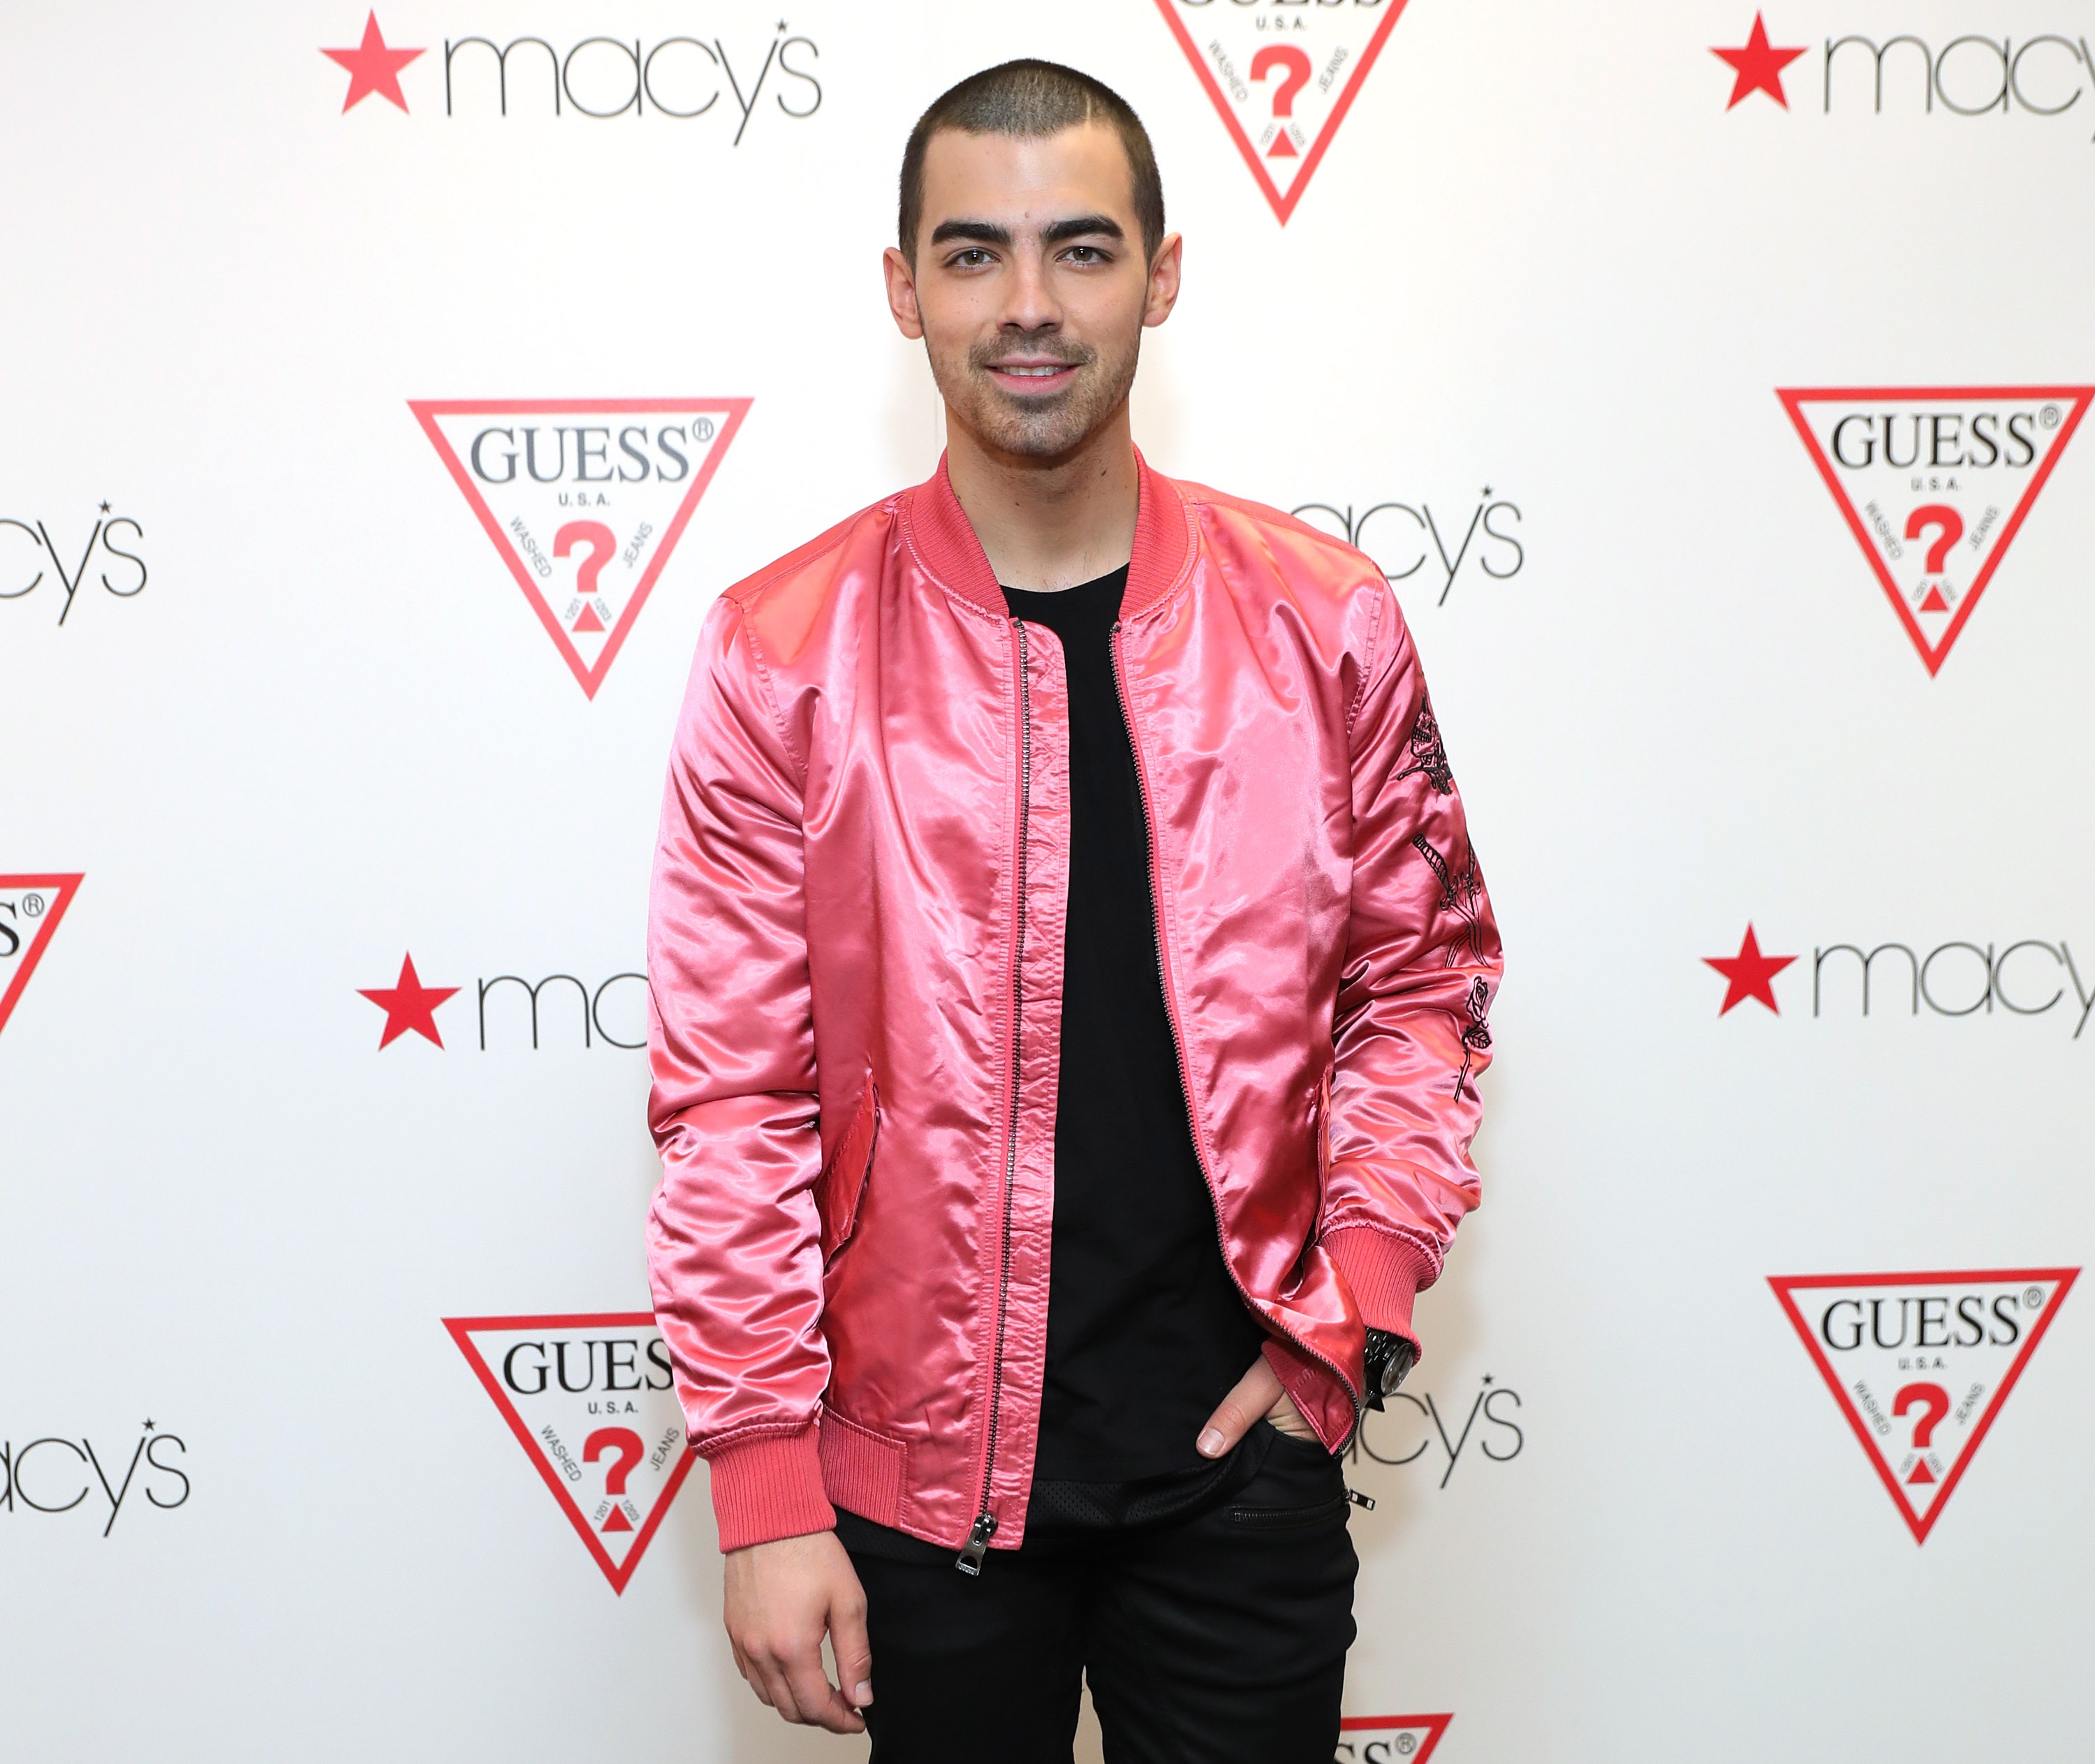 Joe Jonas attends the launch of the new Guess men's underwear line 'Hero' at Macy's Herald Square on March 2, 2017 in New York City.